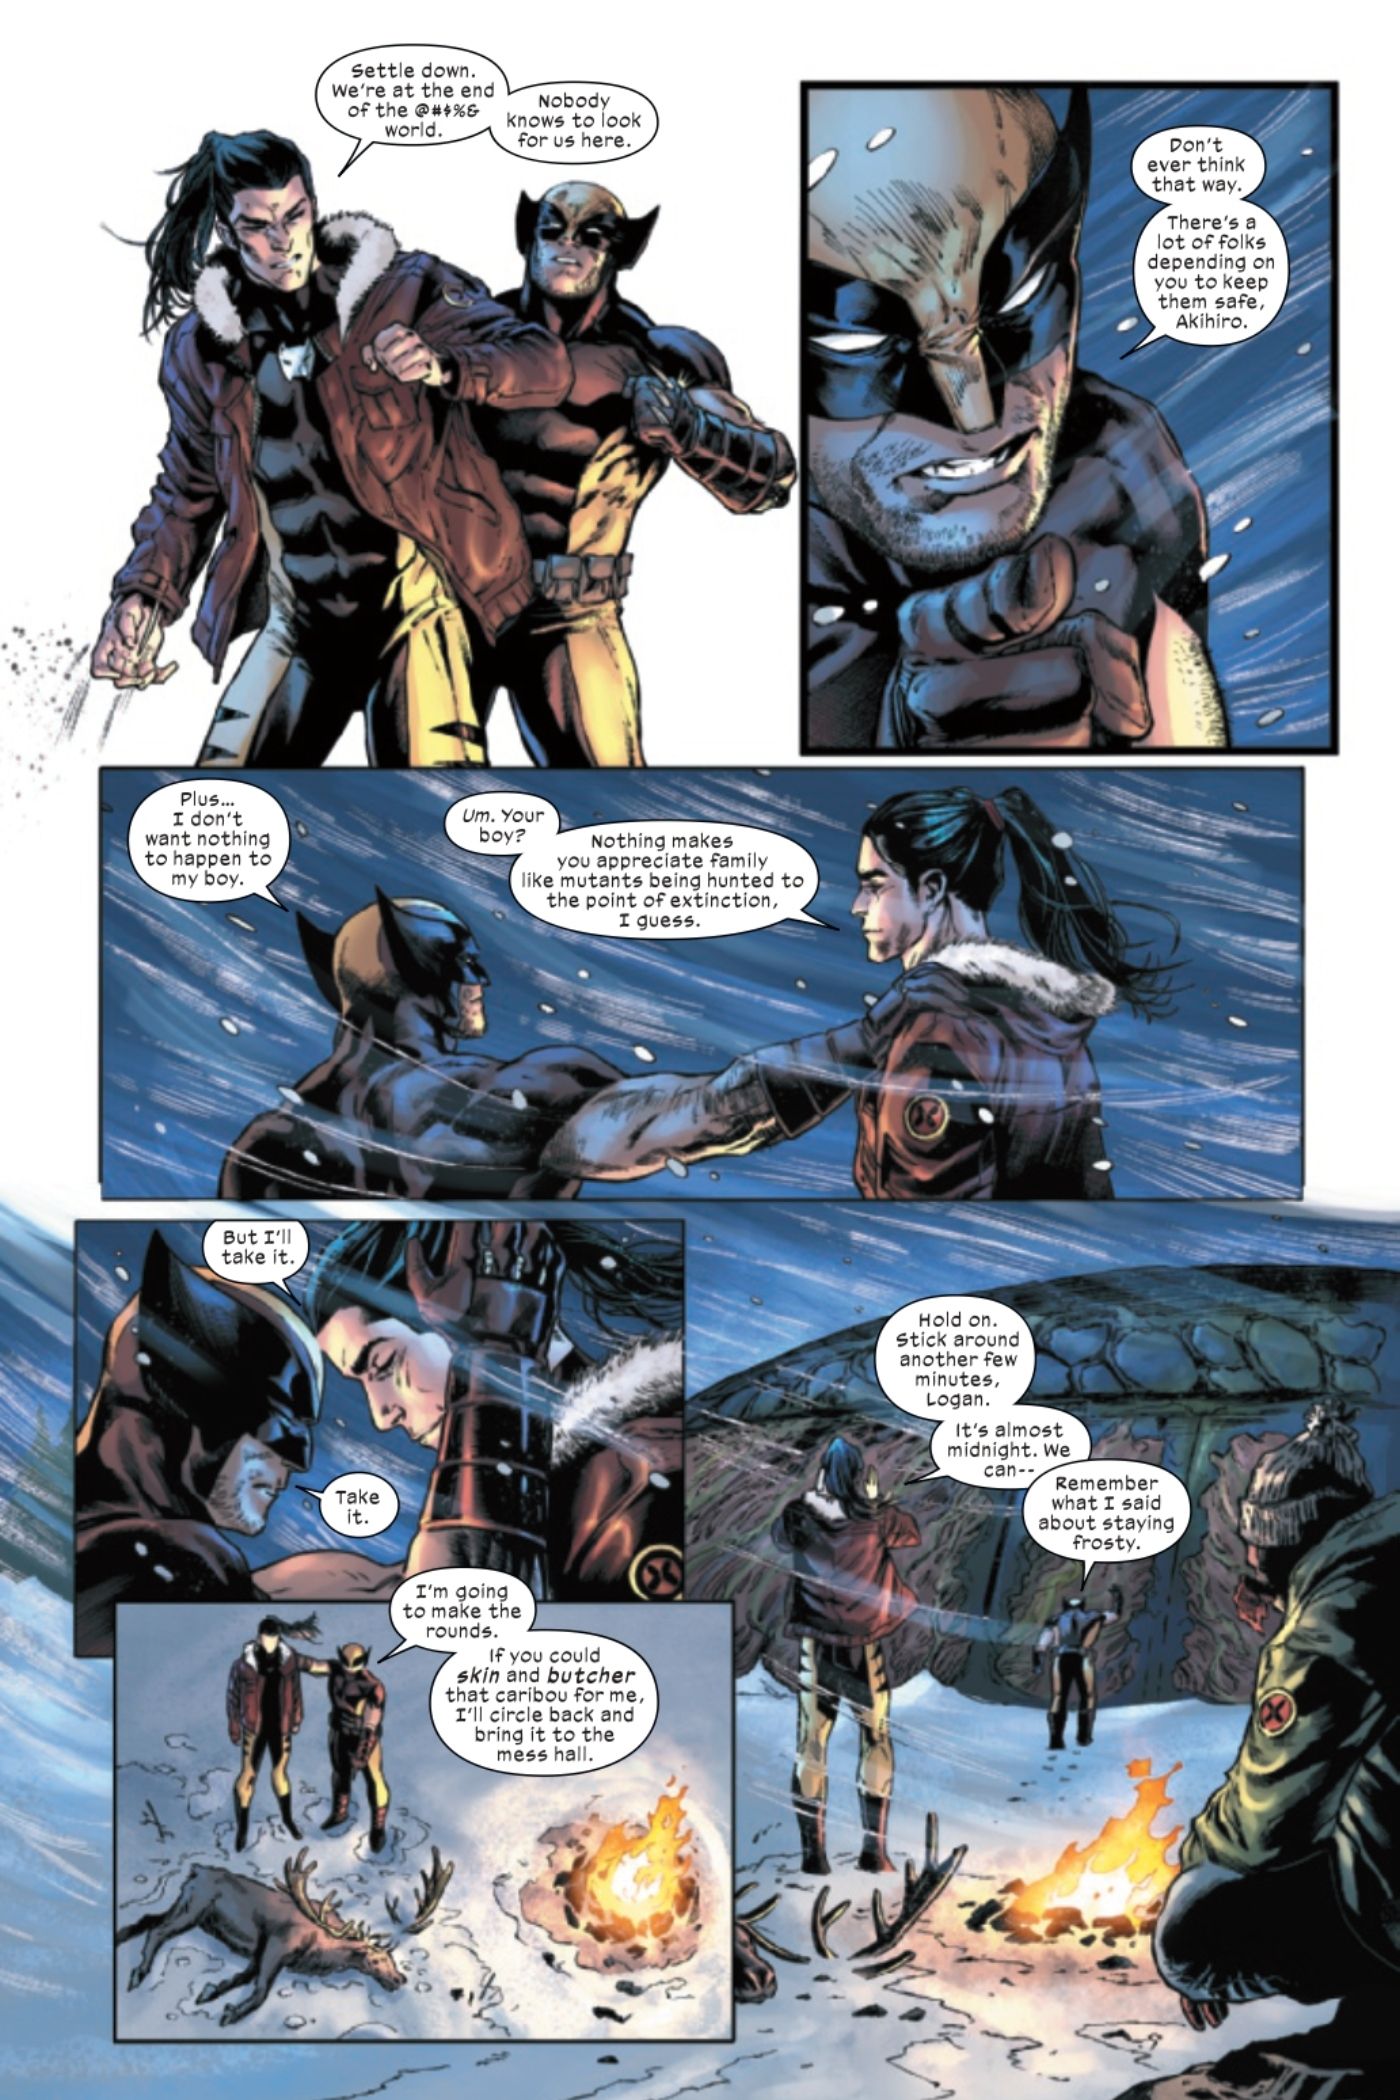 Wolverine #41 - The Sabretooth War Preview page 5.